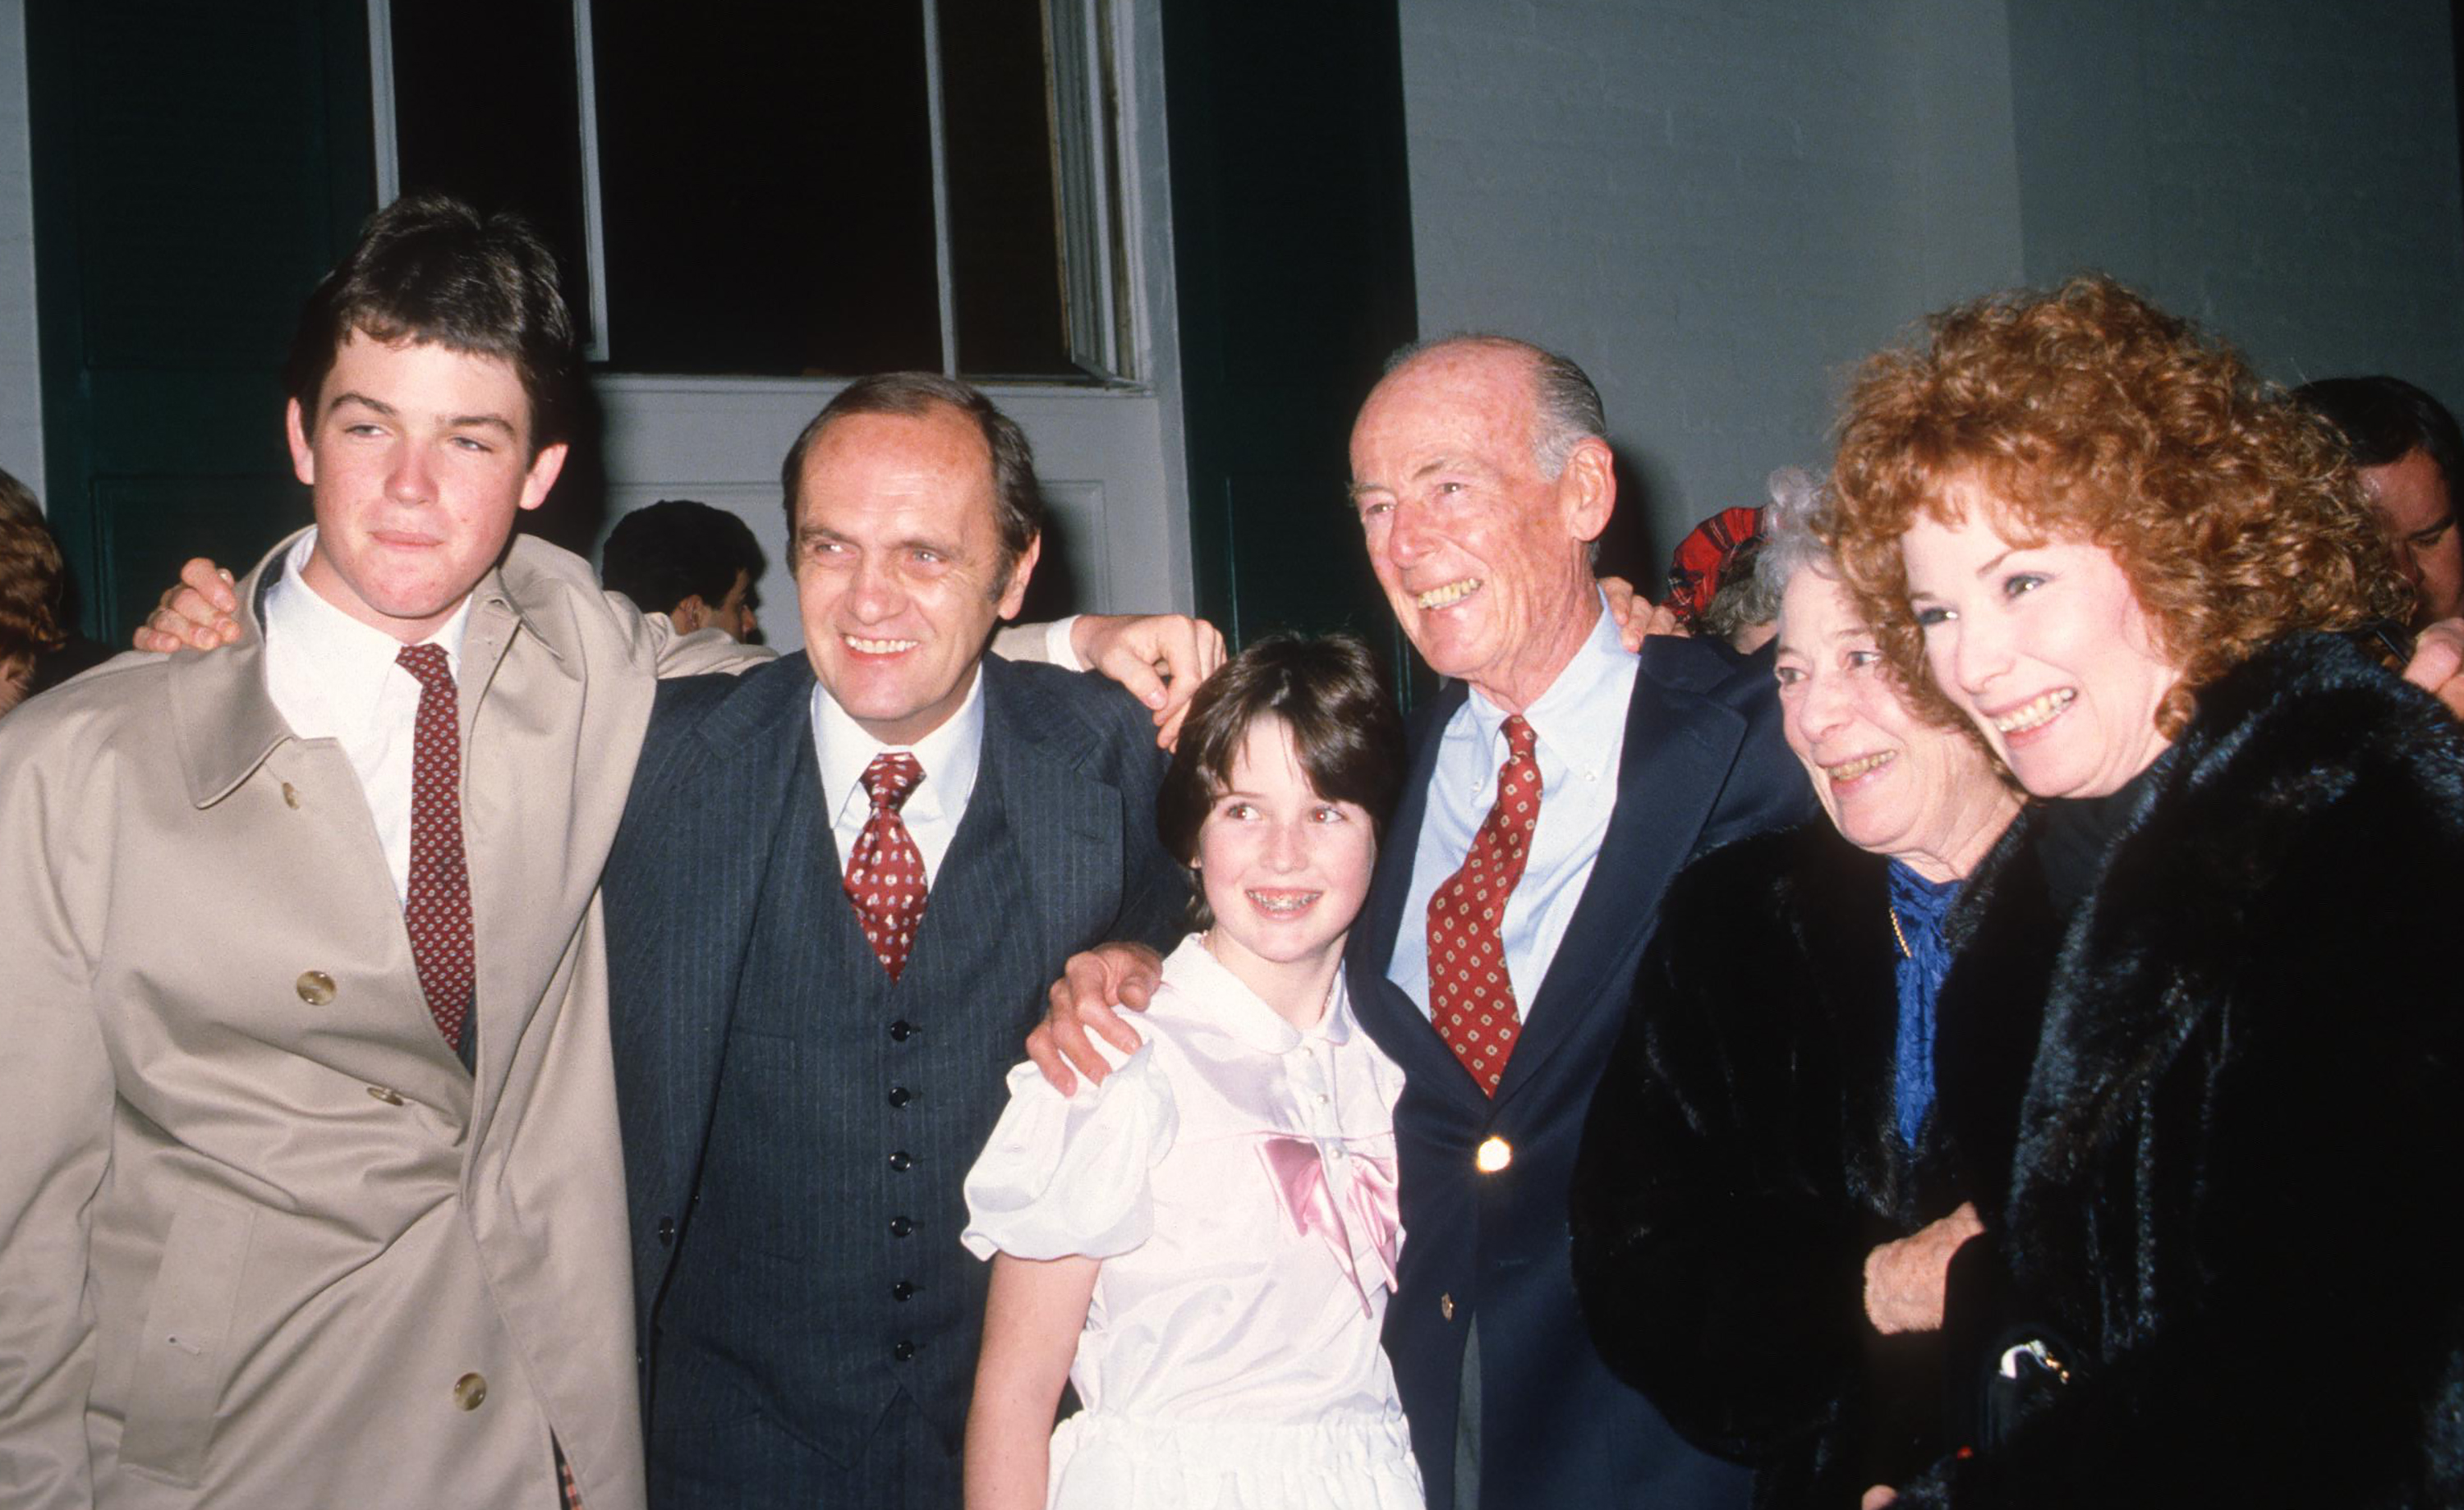 Bob Newhart with Ginnie Newhart and their family attend Party Honoring Quincy Jones at Chasen's Restaurant on March 6, 1983 in Beverly Hills, California | Source: Getty Images